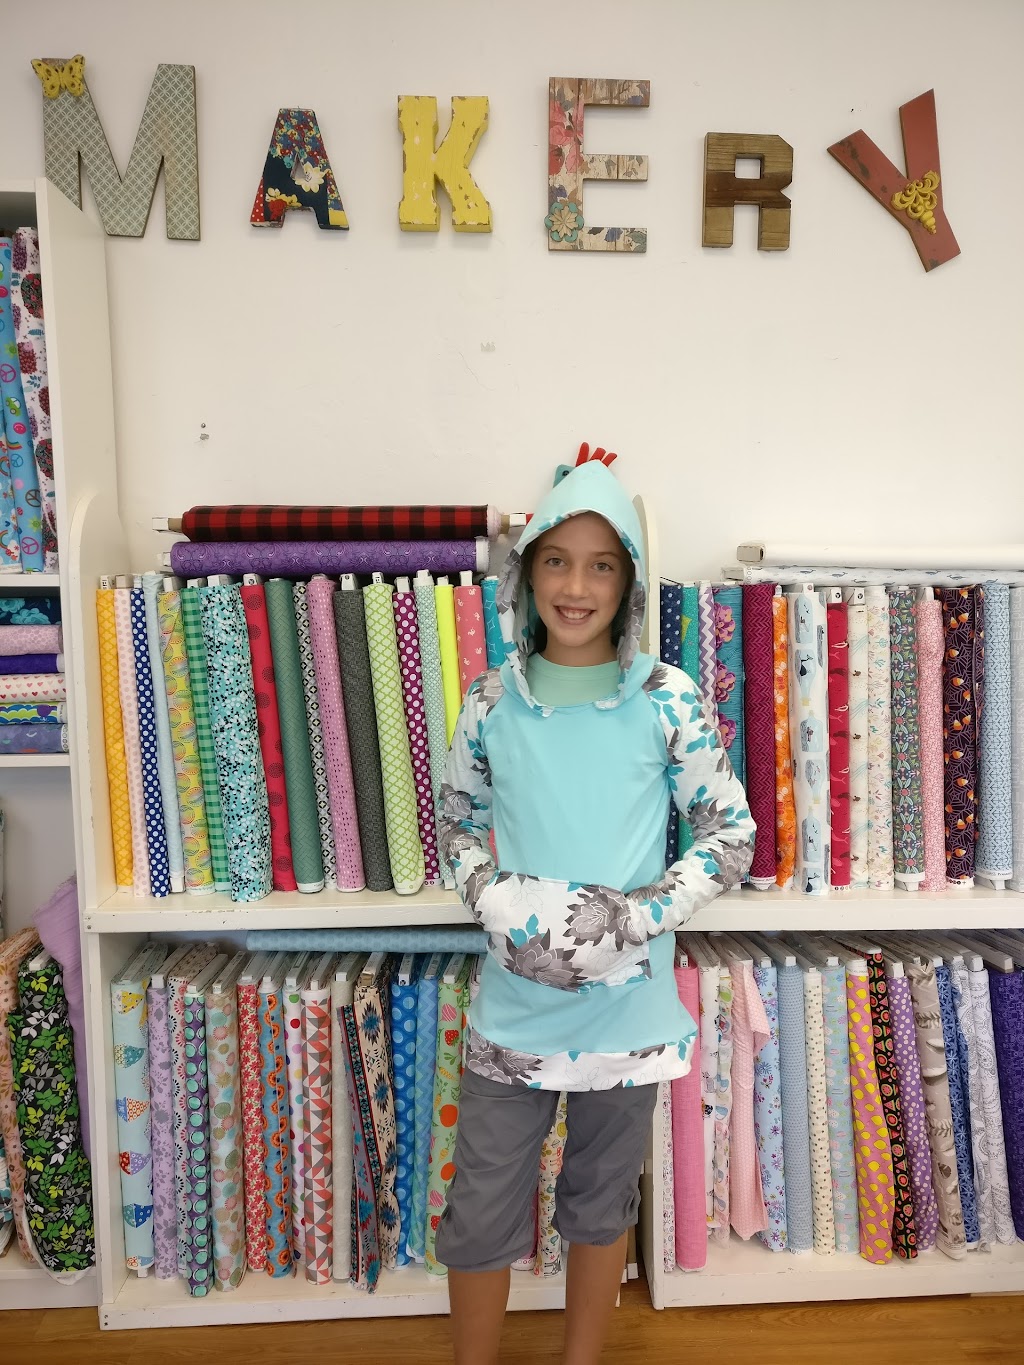 The Makery Sewing Studio | 371 Gannett Rd, Scituate, MA 02066 | Phone: (781) 378-0255